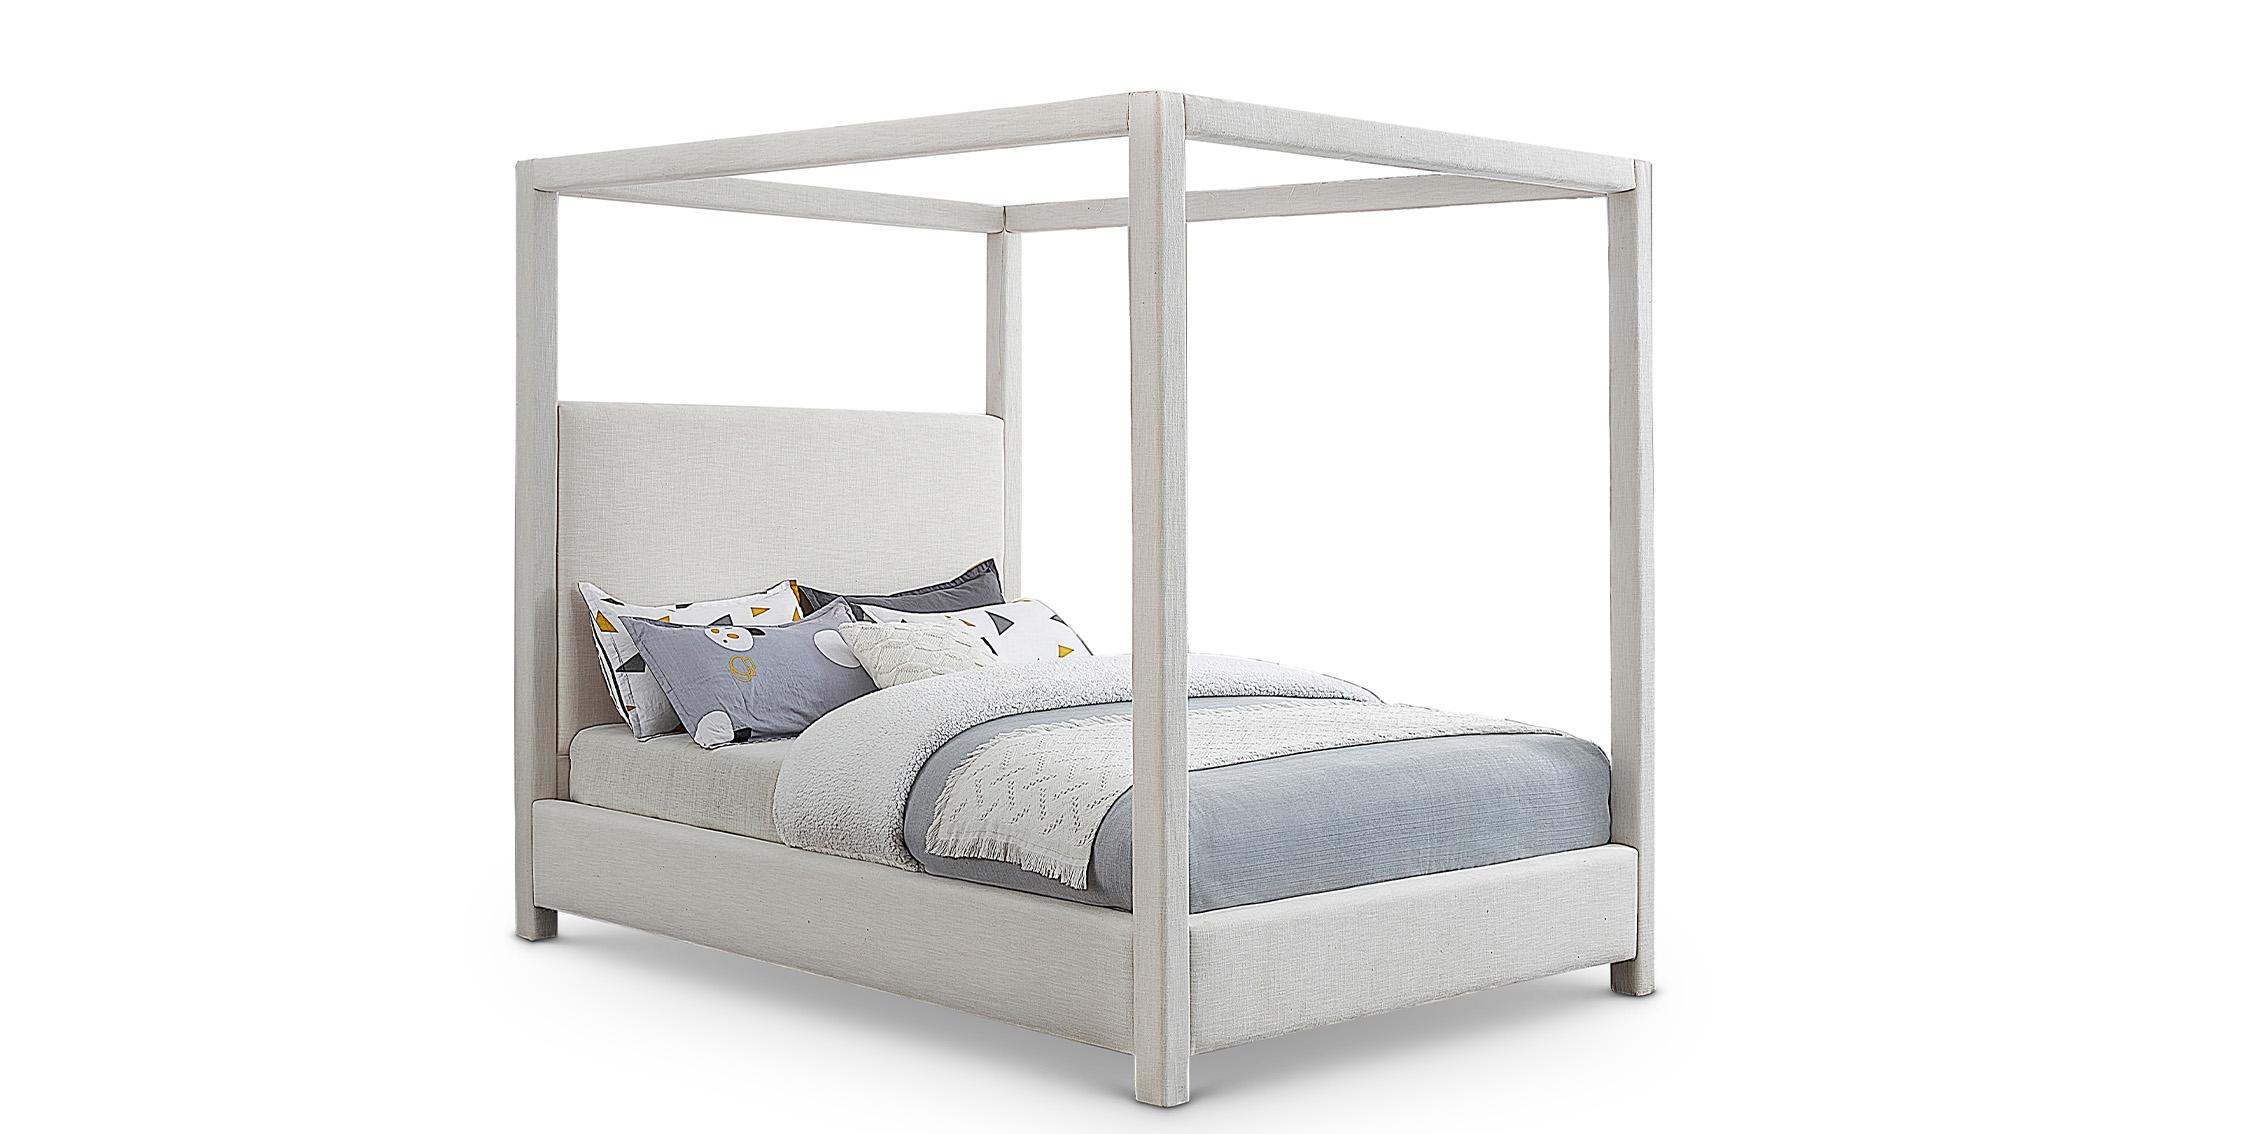 Modern Canopy Bed EmersonCream-Q EmersonCream-Q in Cream Linen